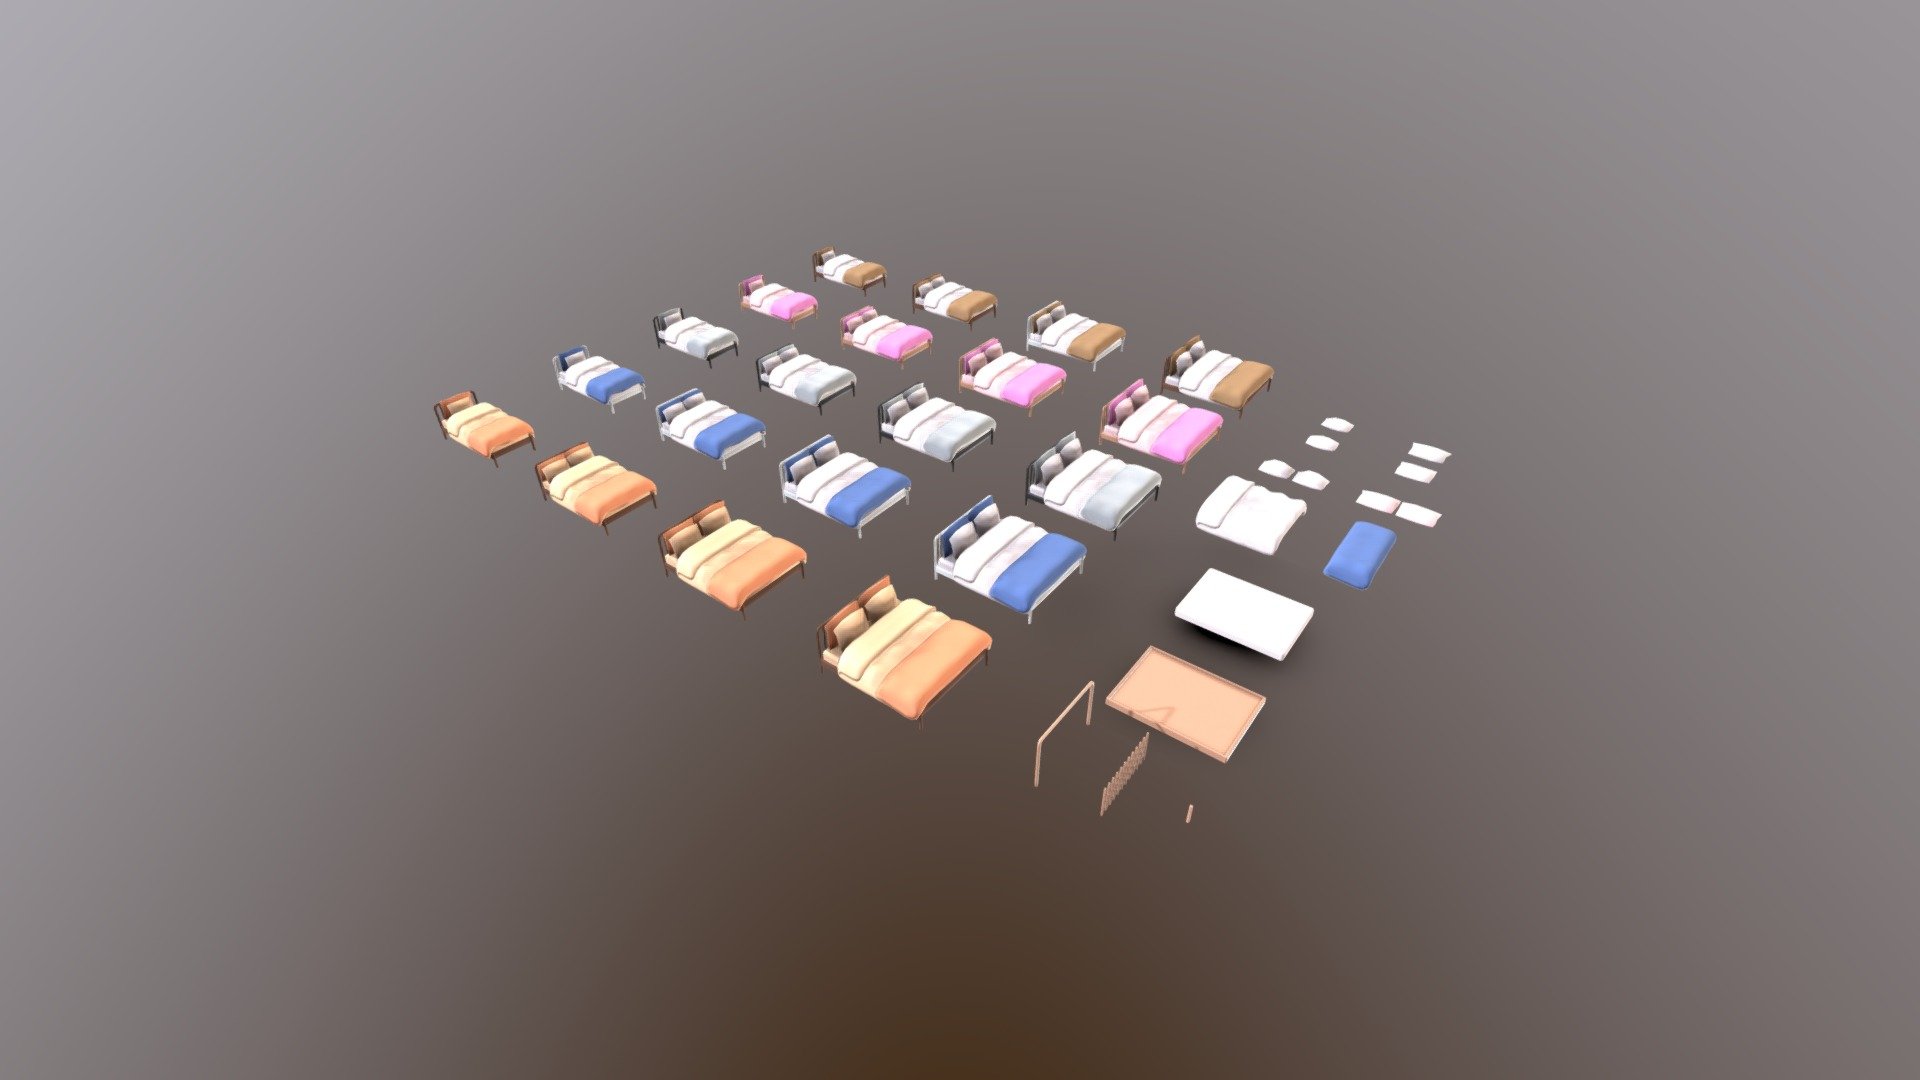 This pack includes over 30+ unique low poly ready-to-use prefabs, different models and materials. Just drag and drop prefabs into your scene and achieve beautiful rooms in no time. You can also use a variety of models and materials to create a different beds, creating a beautiful bedroom with a variety of styles. Saled in Unity assets store 3d model